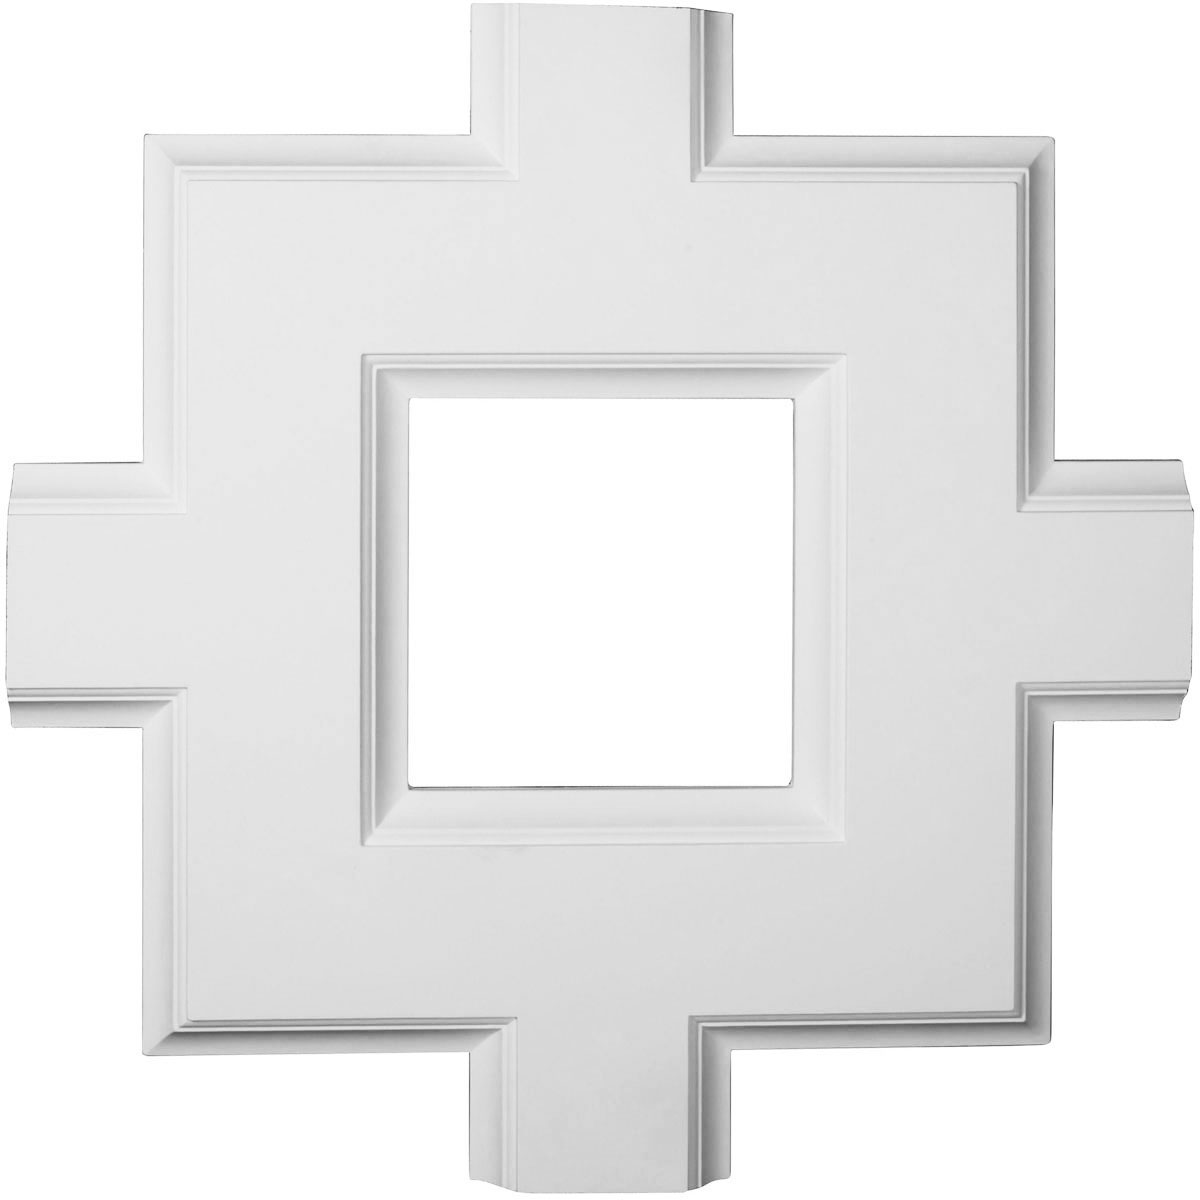 36 X 2 X 36 In. Inner Square Intersection For 8 Traditional Coffered Ceiling System